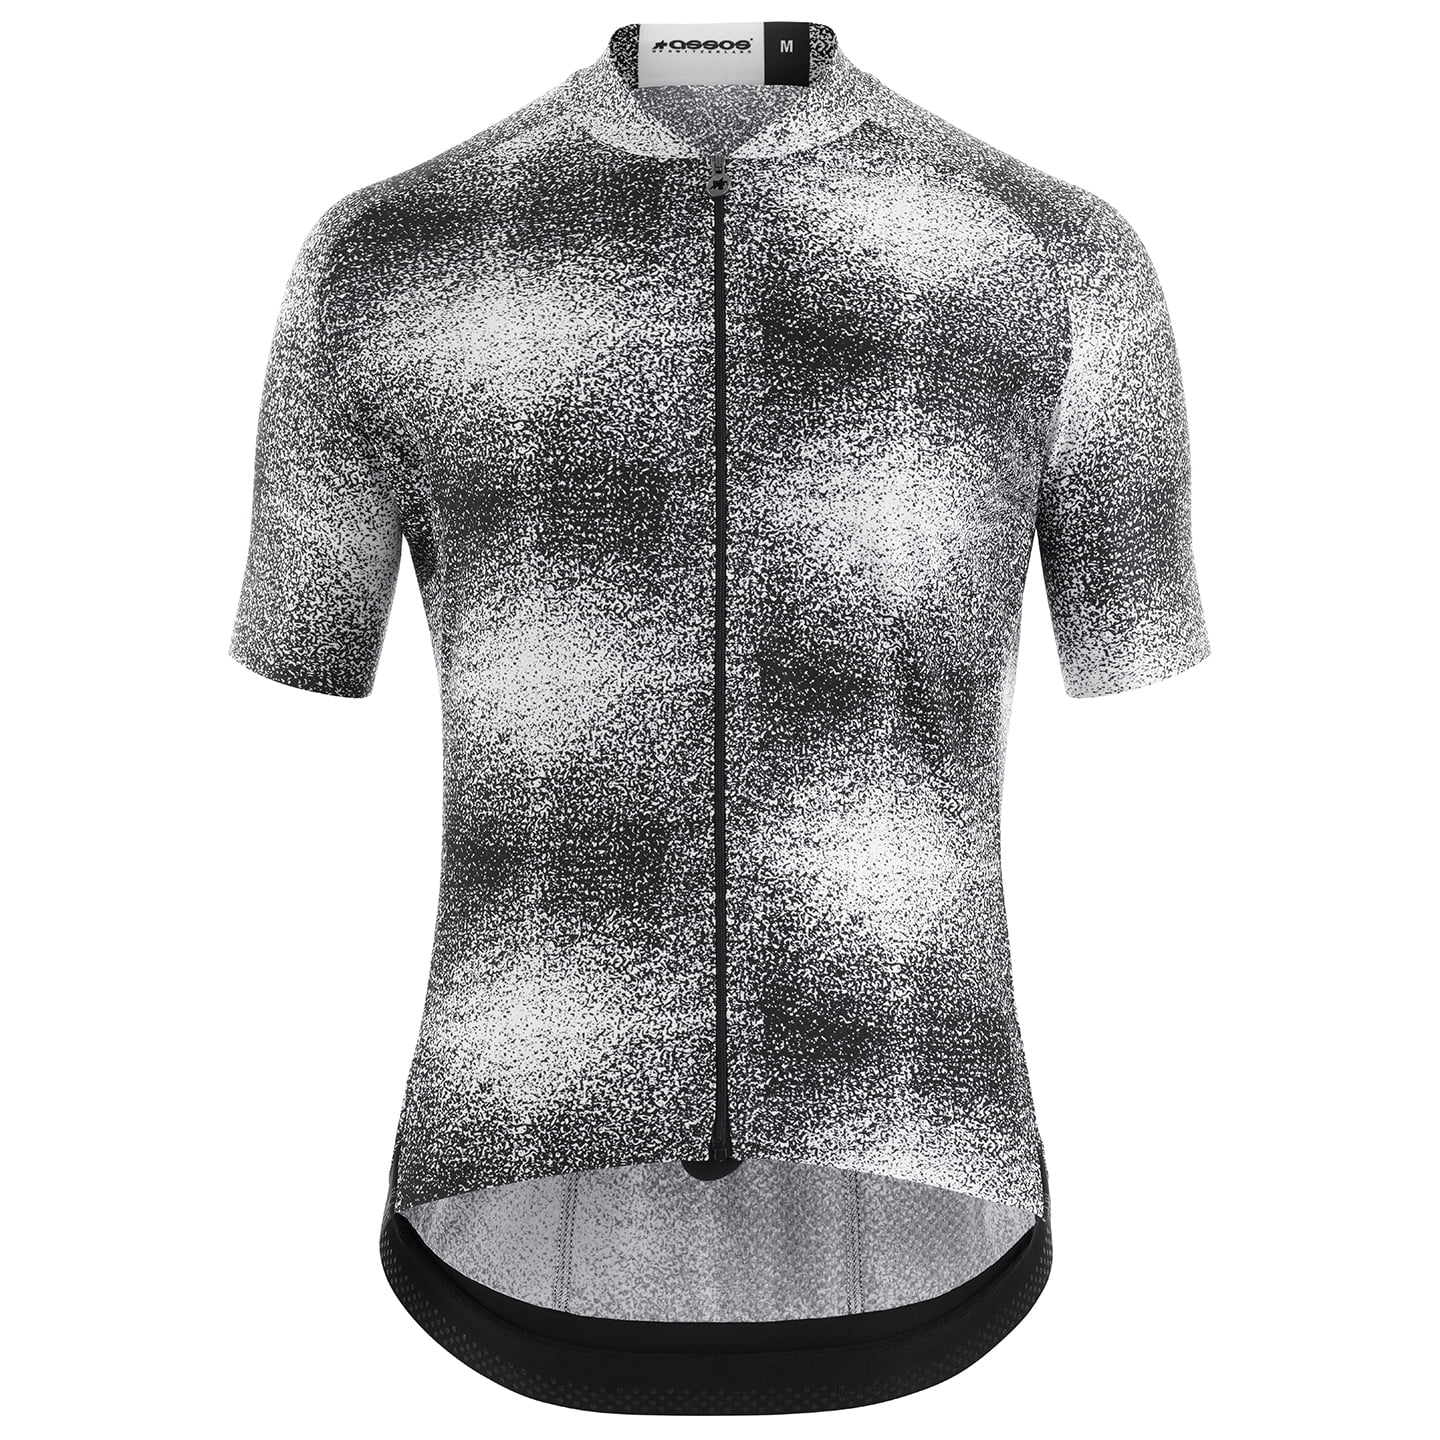 ASSOS Mille GT C2 EVO Zeus Short Sleeve Jersey Short Sleeve Jersey, for men, size S, Cycling jersey, Cycling clothing